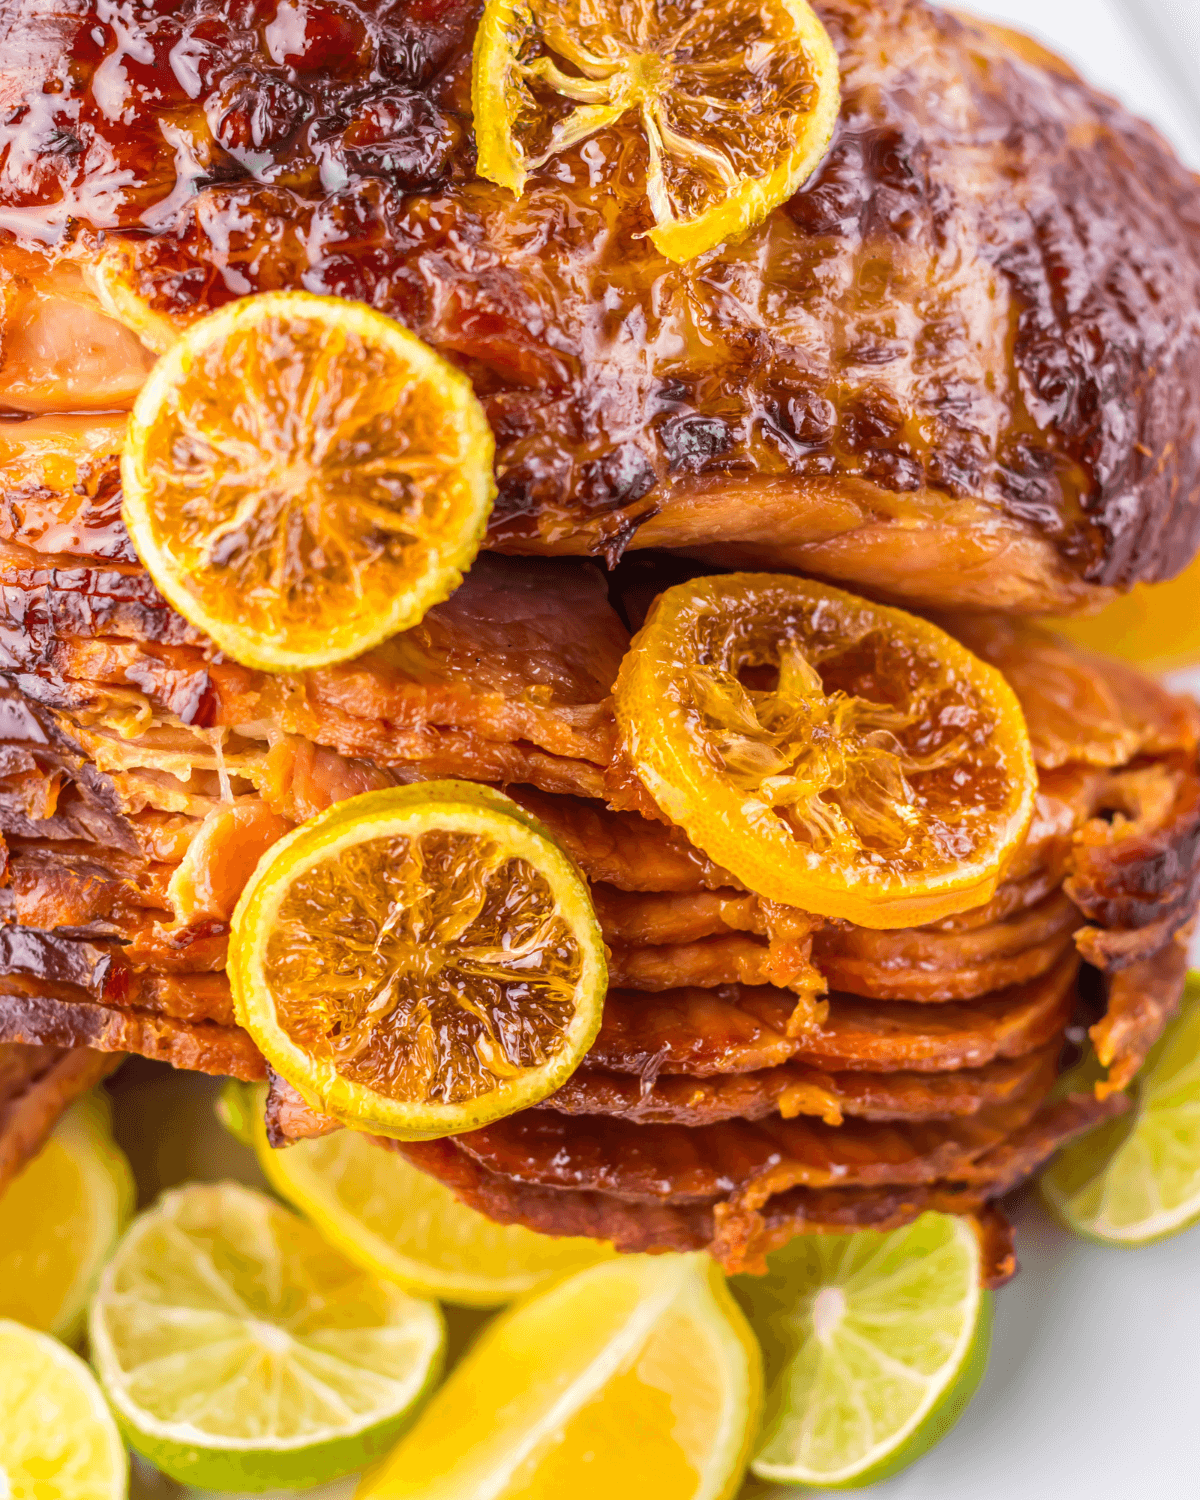 Glazed crock pot spiral ham topped with caramelized citrus slices, surrounded by fresh lime wedges.